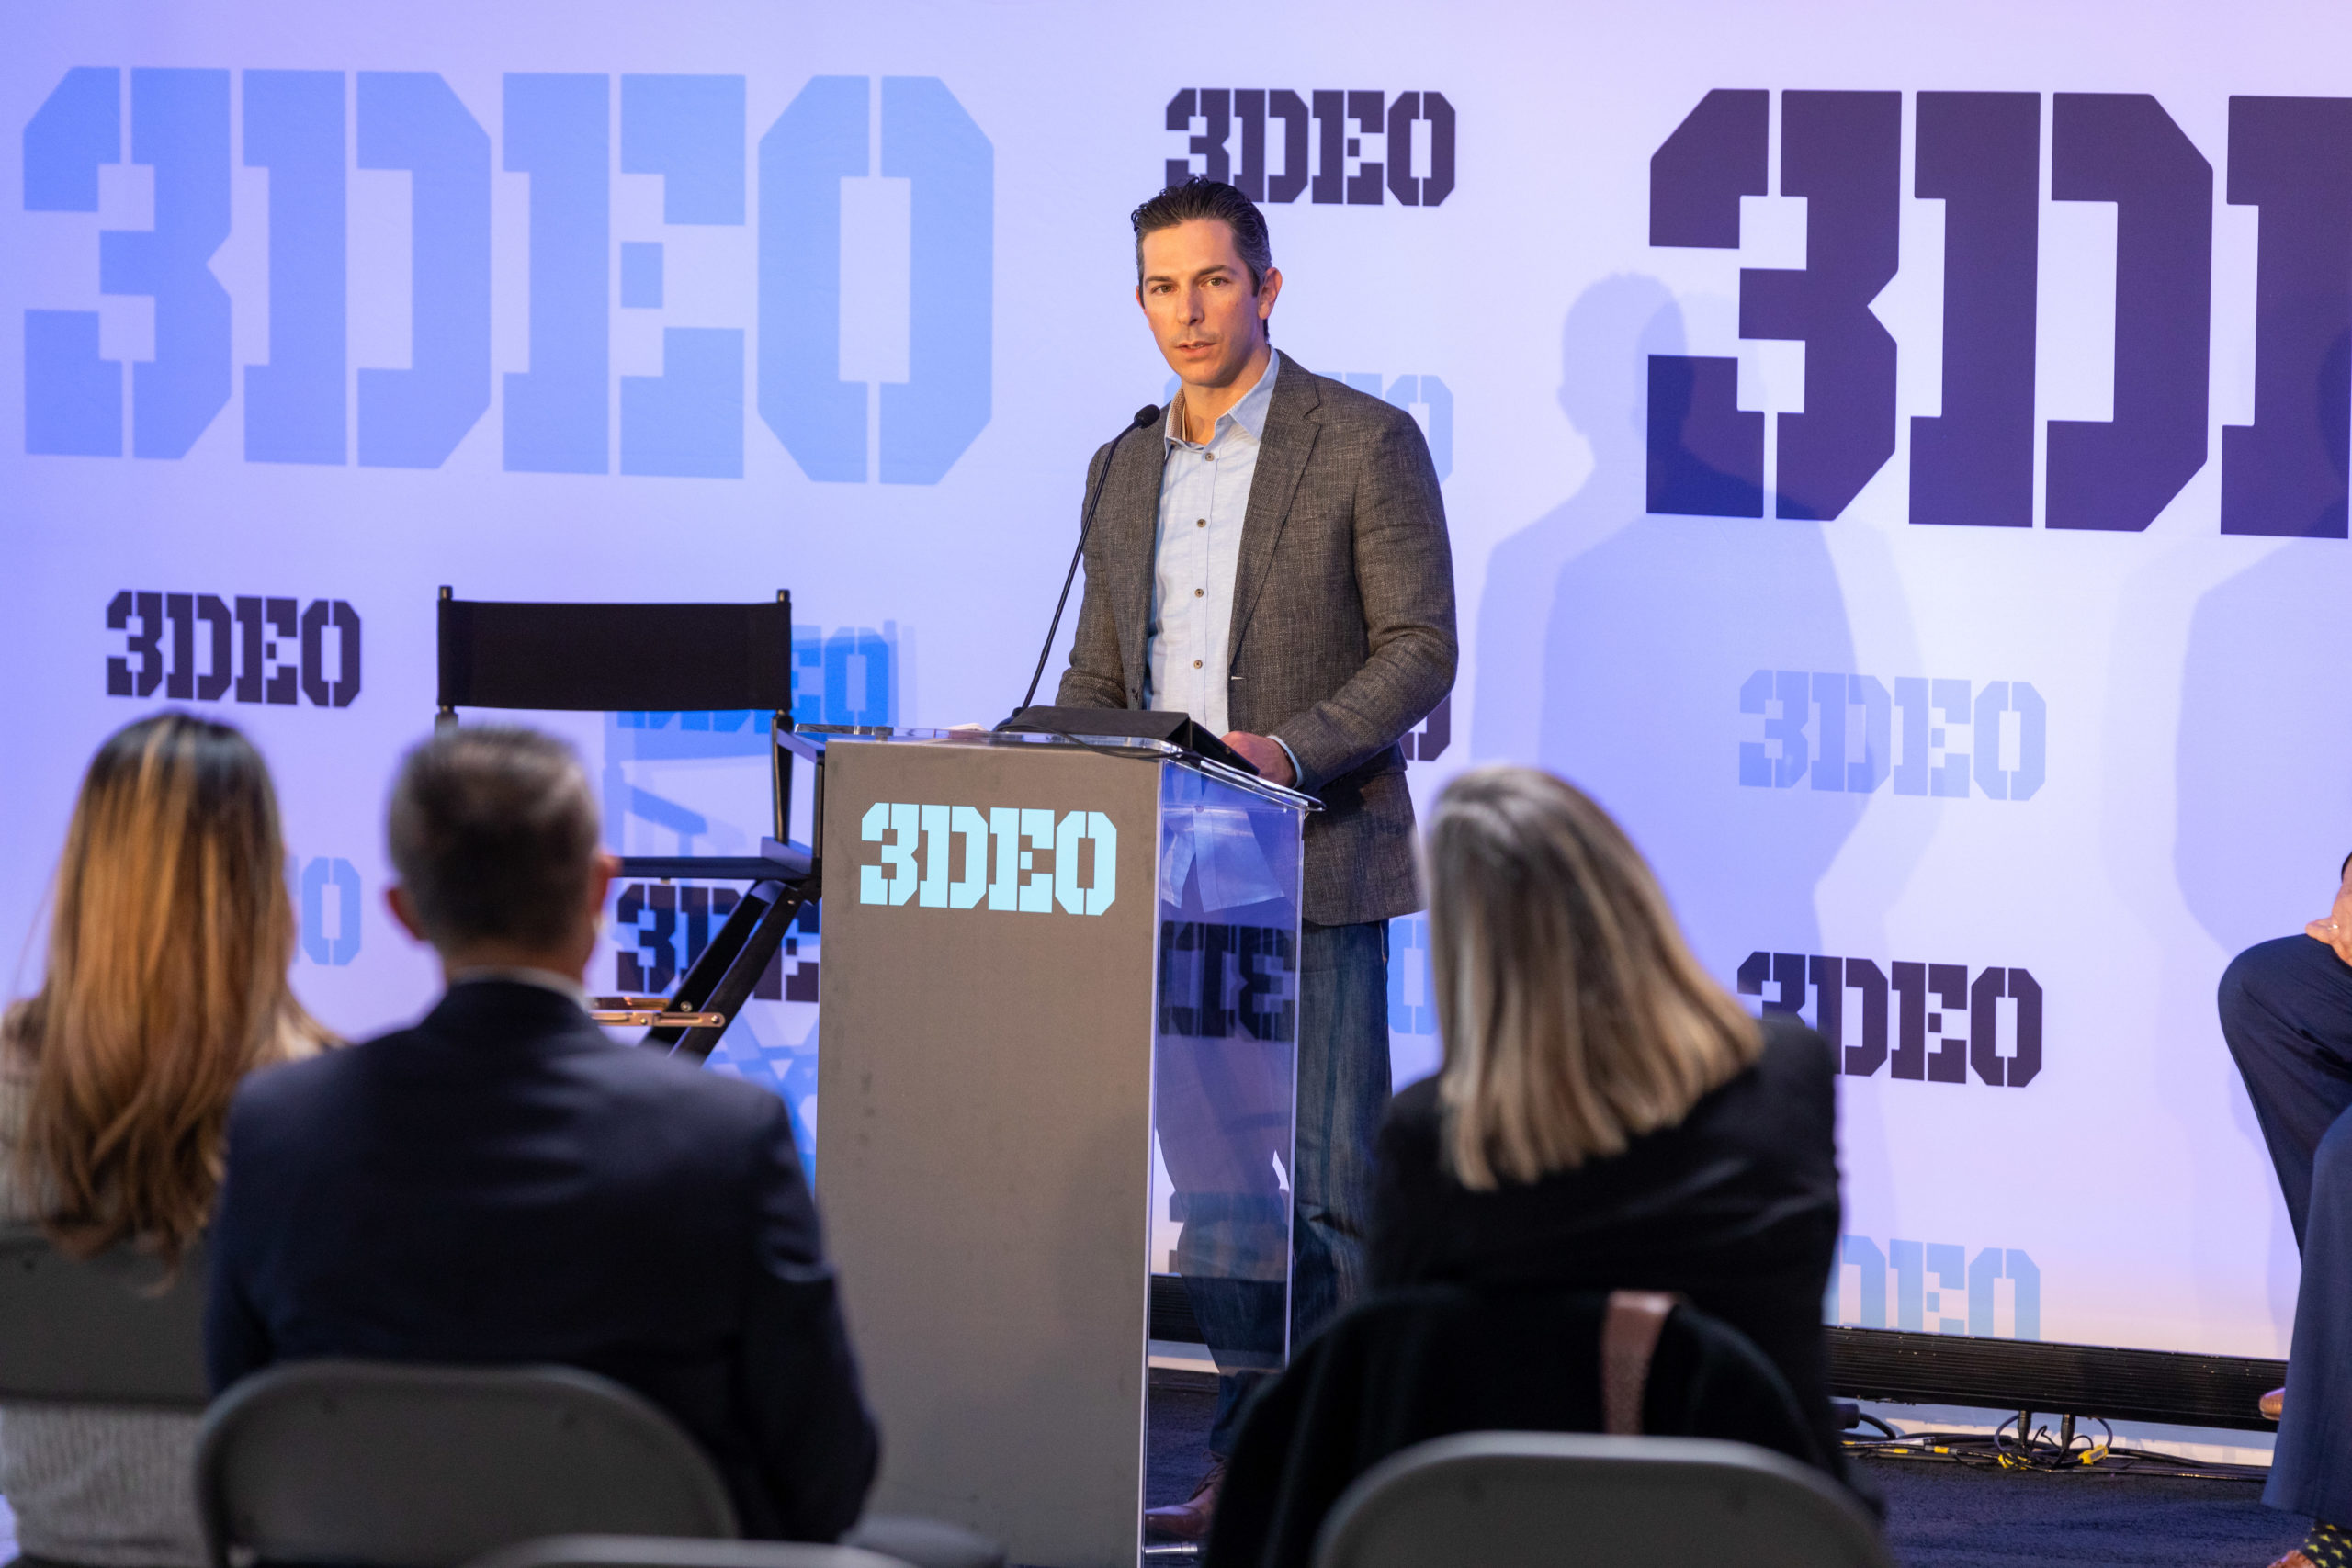 A man stands at a podium labeled "3deo" presenting to an audience in a conference room with "3deo" graphics in the background.